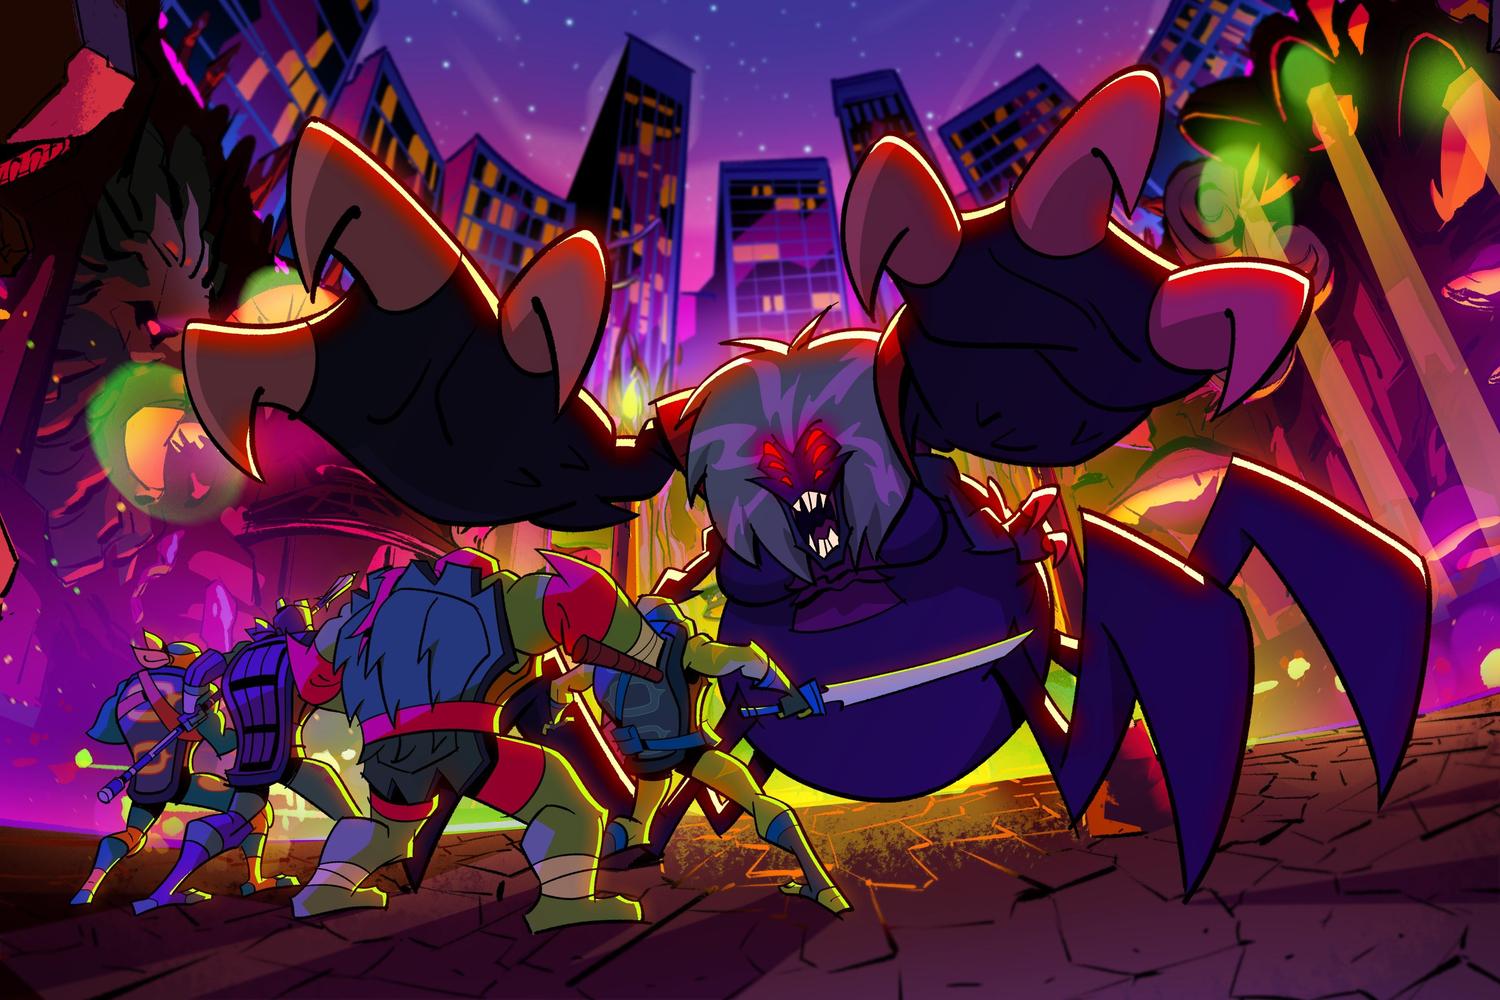 FIRST LOOK: Lena Headey Voices Giant Spider in RISE OF THE TMNT Cartoon